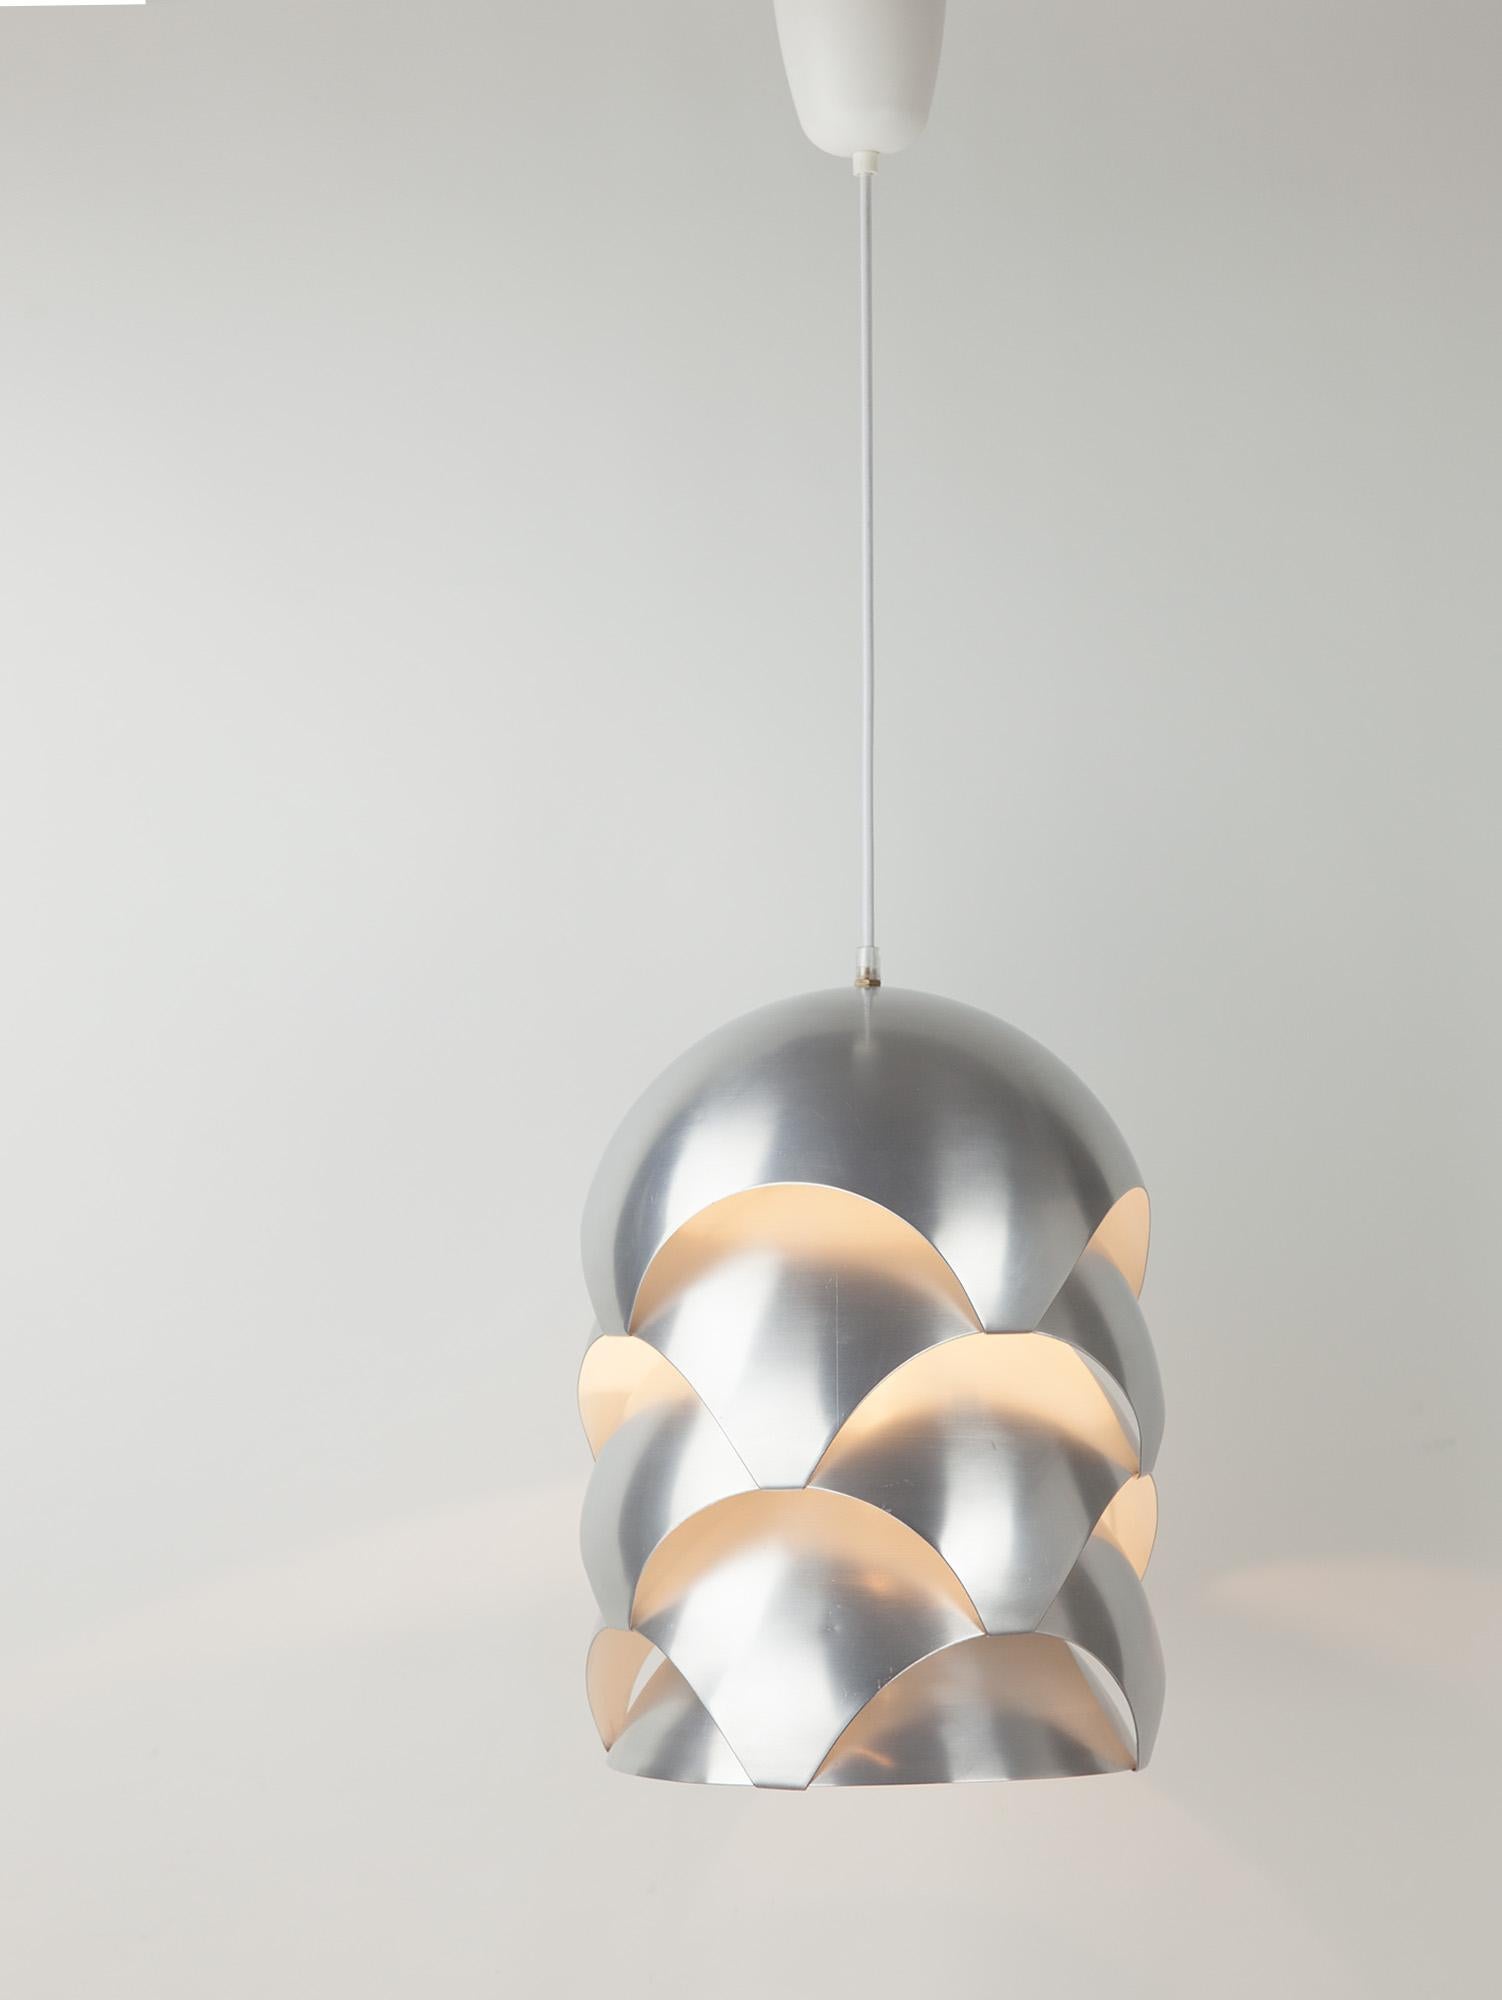 Very rare brushed aluminium ‘Kongelpendel’ pendant by Sven Ivar Dysthe for Sønnico. Four layered domed segments interlock and emit a soft light from the arched cutaways. The light bounces off the white internal walls in lovely soft tonal hues. The